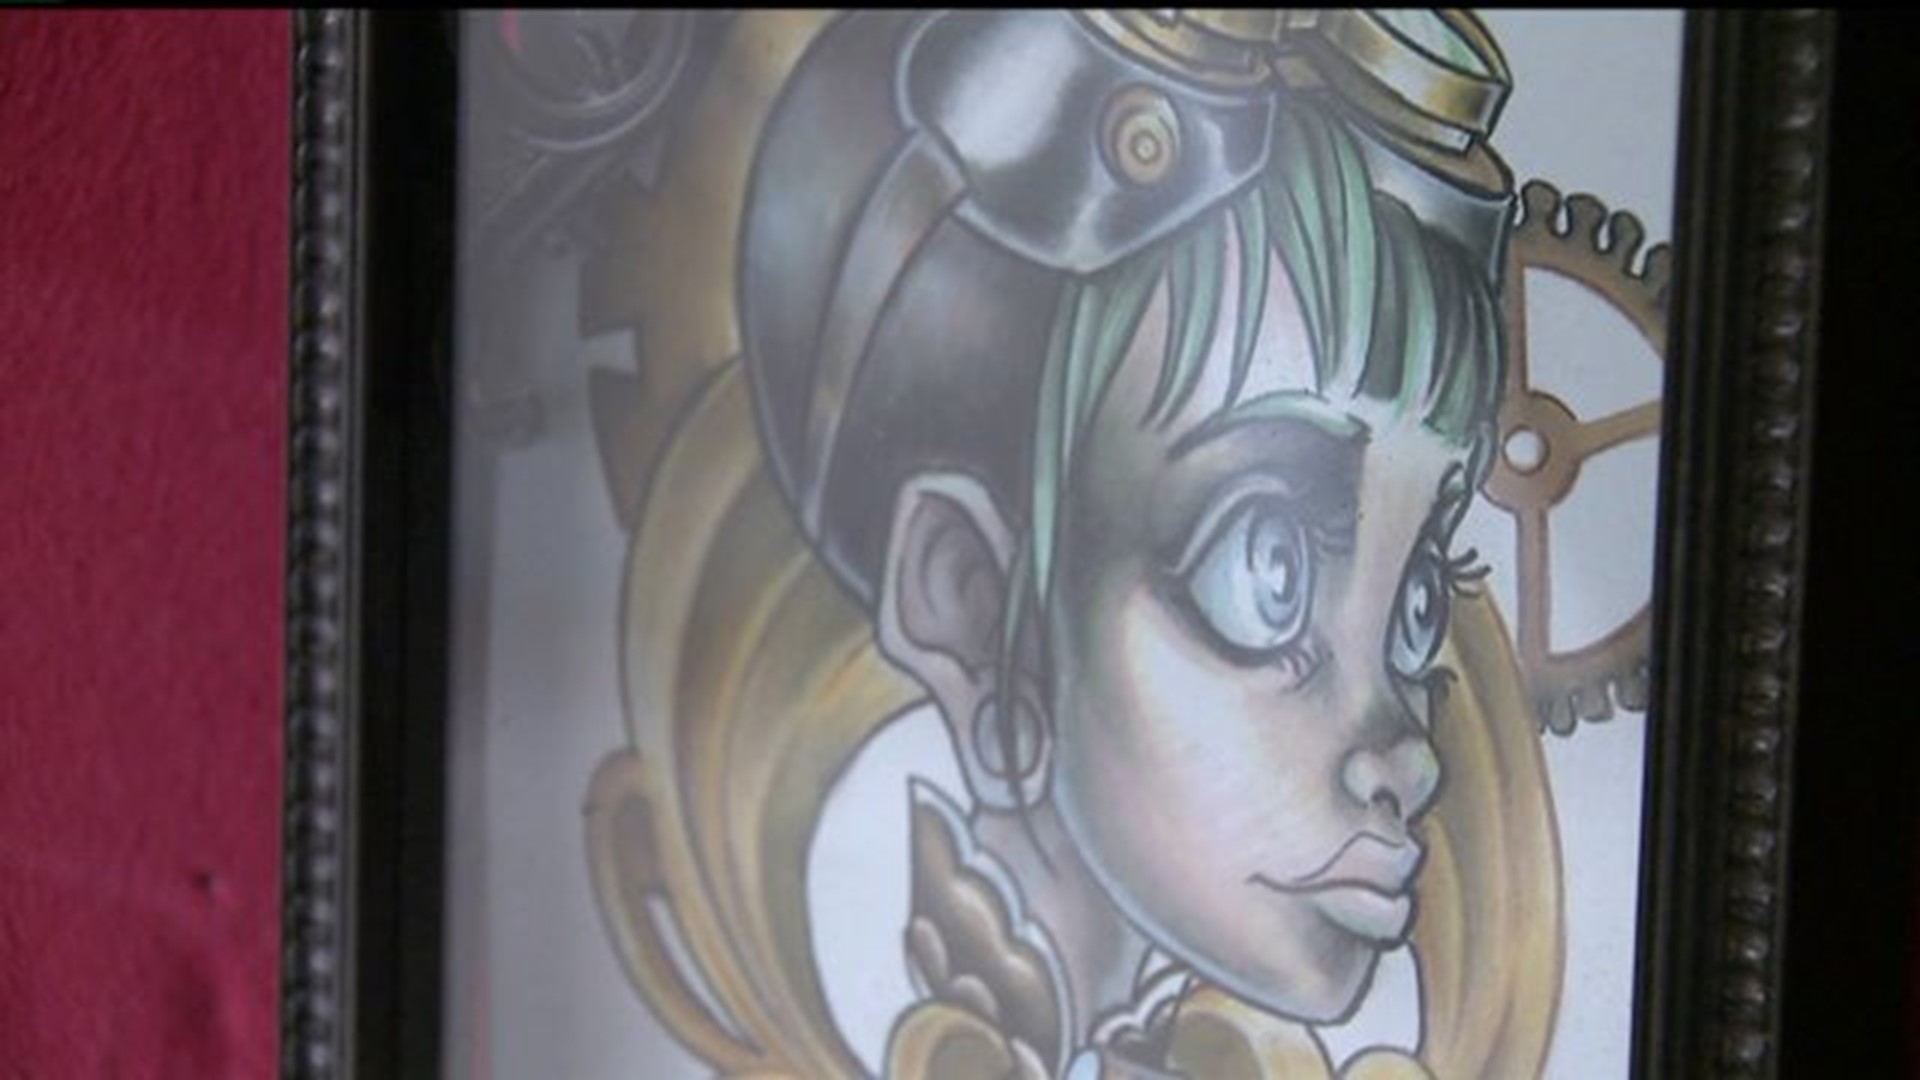 Jaded Gypsy Tattoo parlor raising funds for a comeback